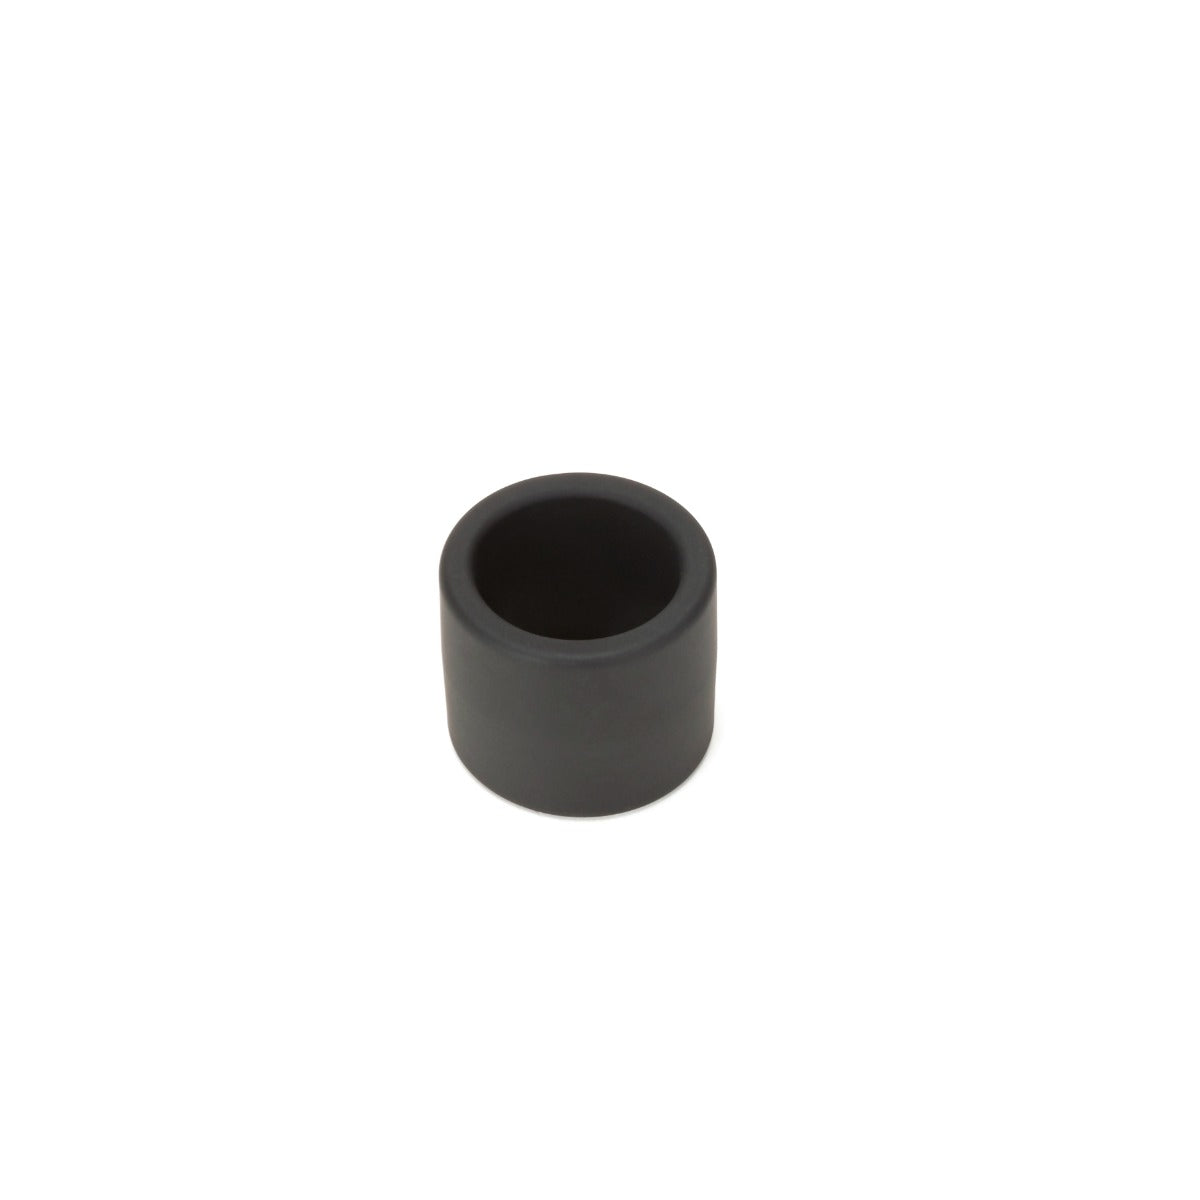 a black plastic tube on a white background